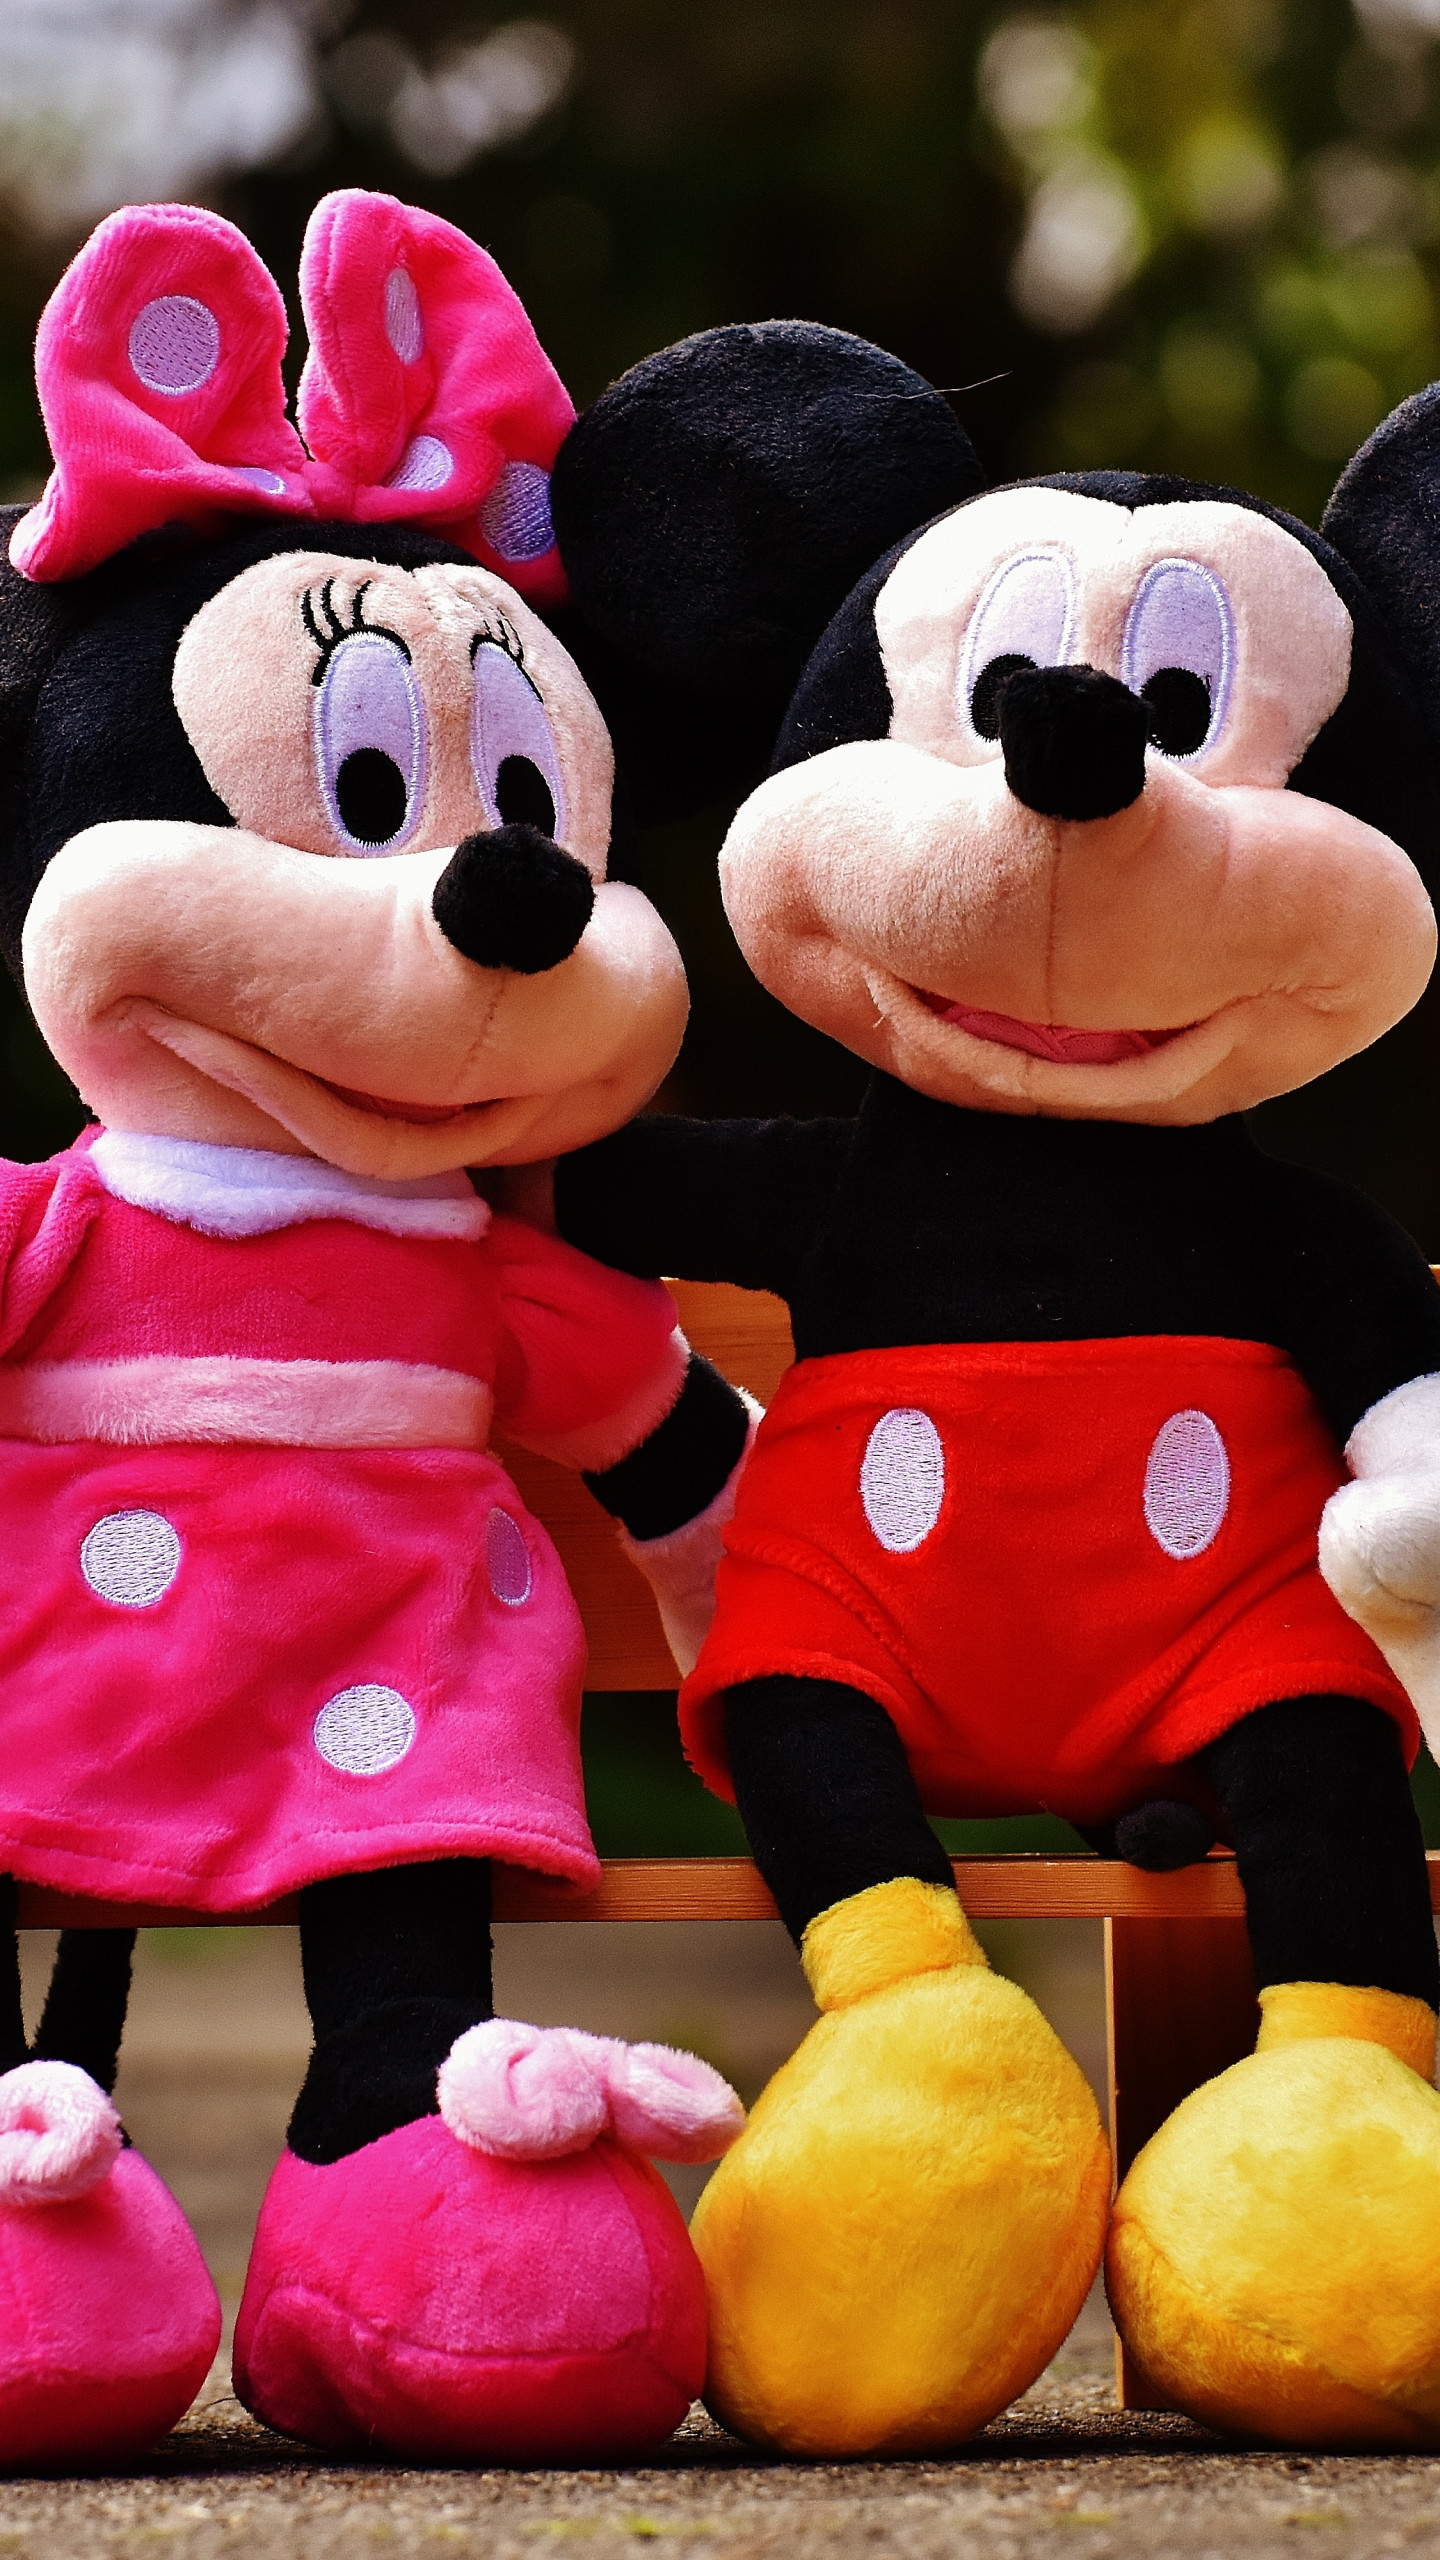 Preview Wallpaper Mickey Mouse Minnie Mouse Mouse Toys 1440x2560 1440x2560